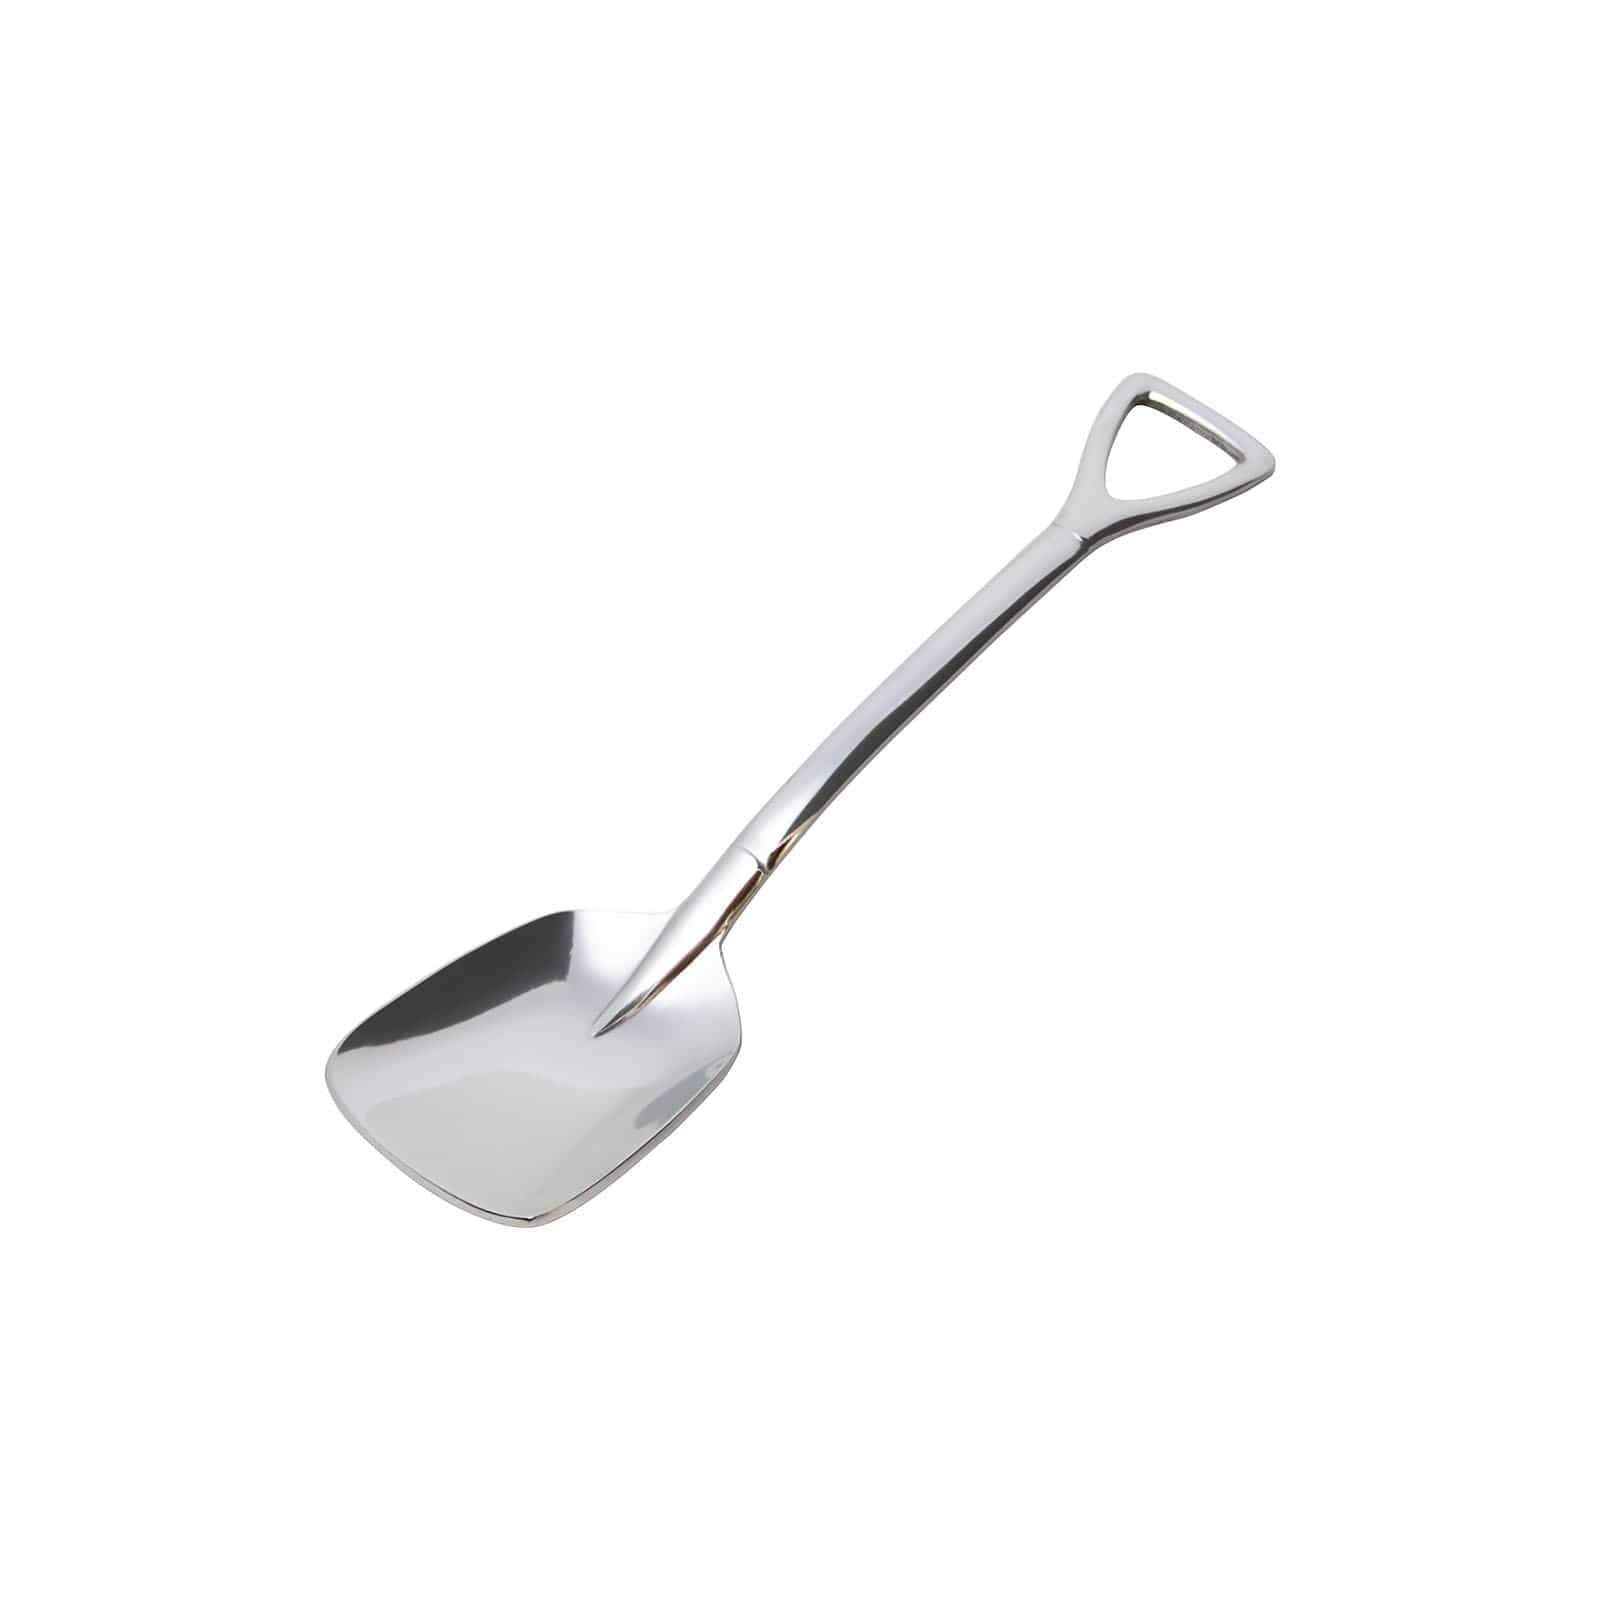 Takeda Garden Shovel Shaped Stainless Steel Ice Cream Spoon 11.5cm (Square Head) (Mirror Finish) Loose Cutlery